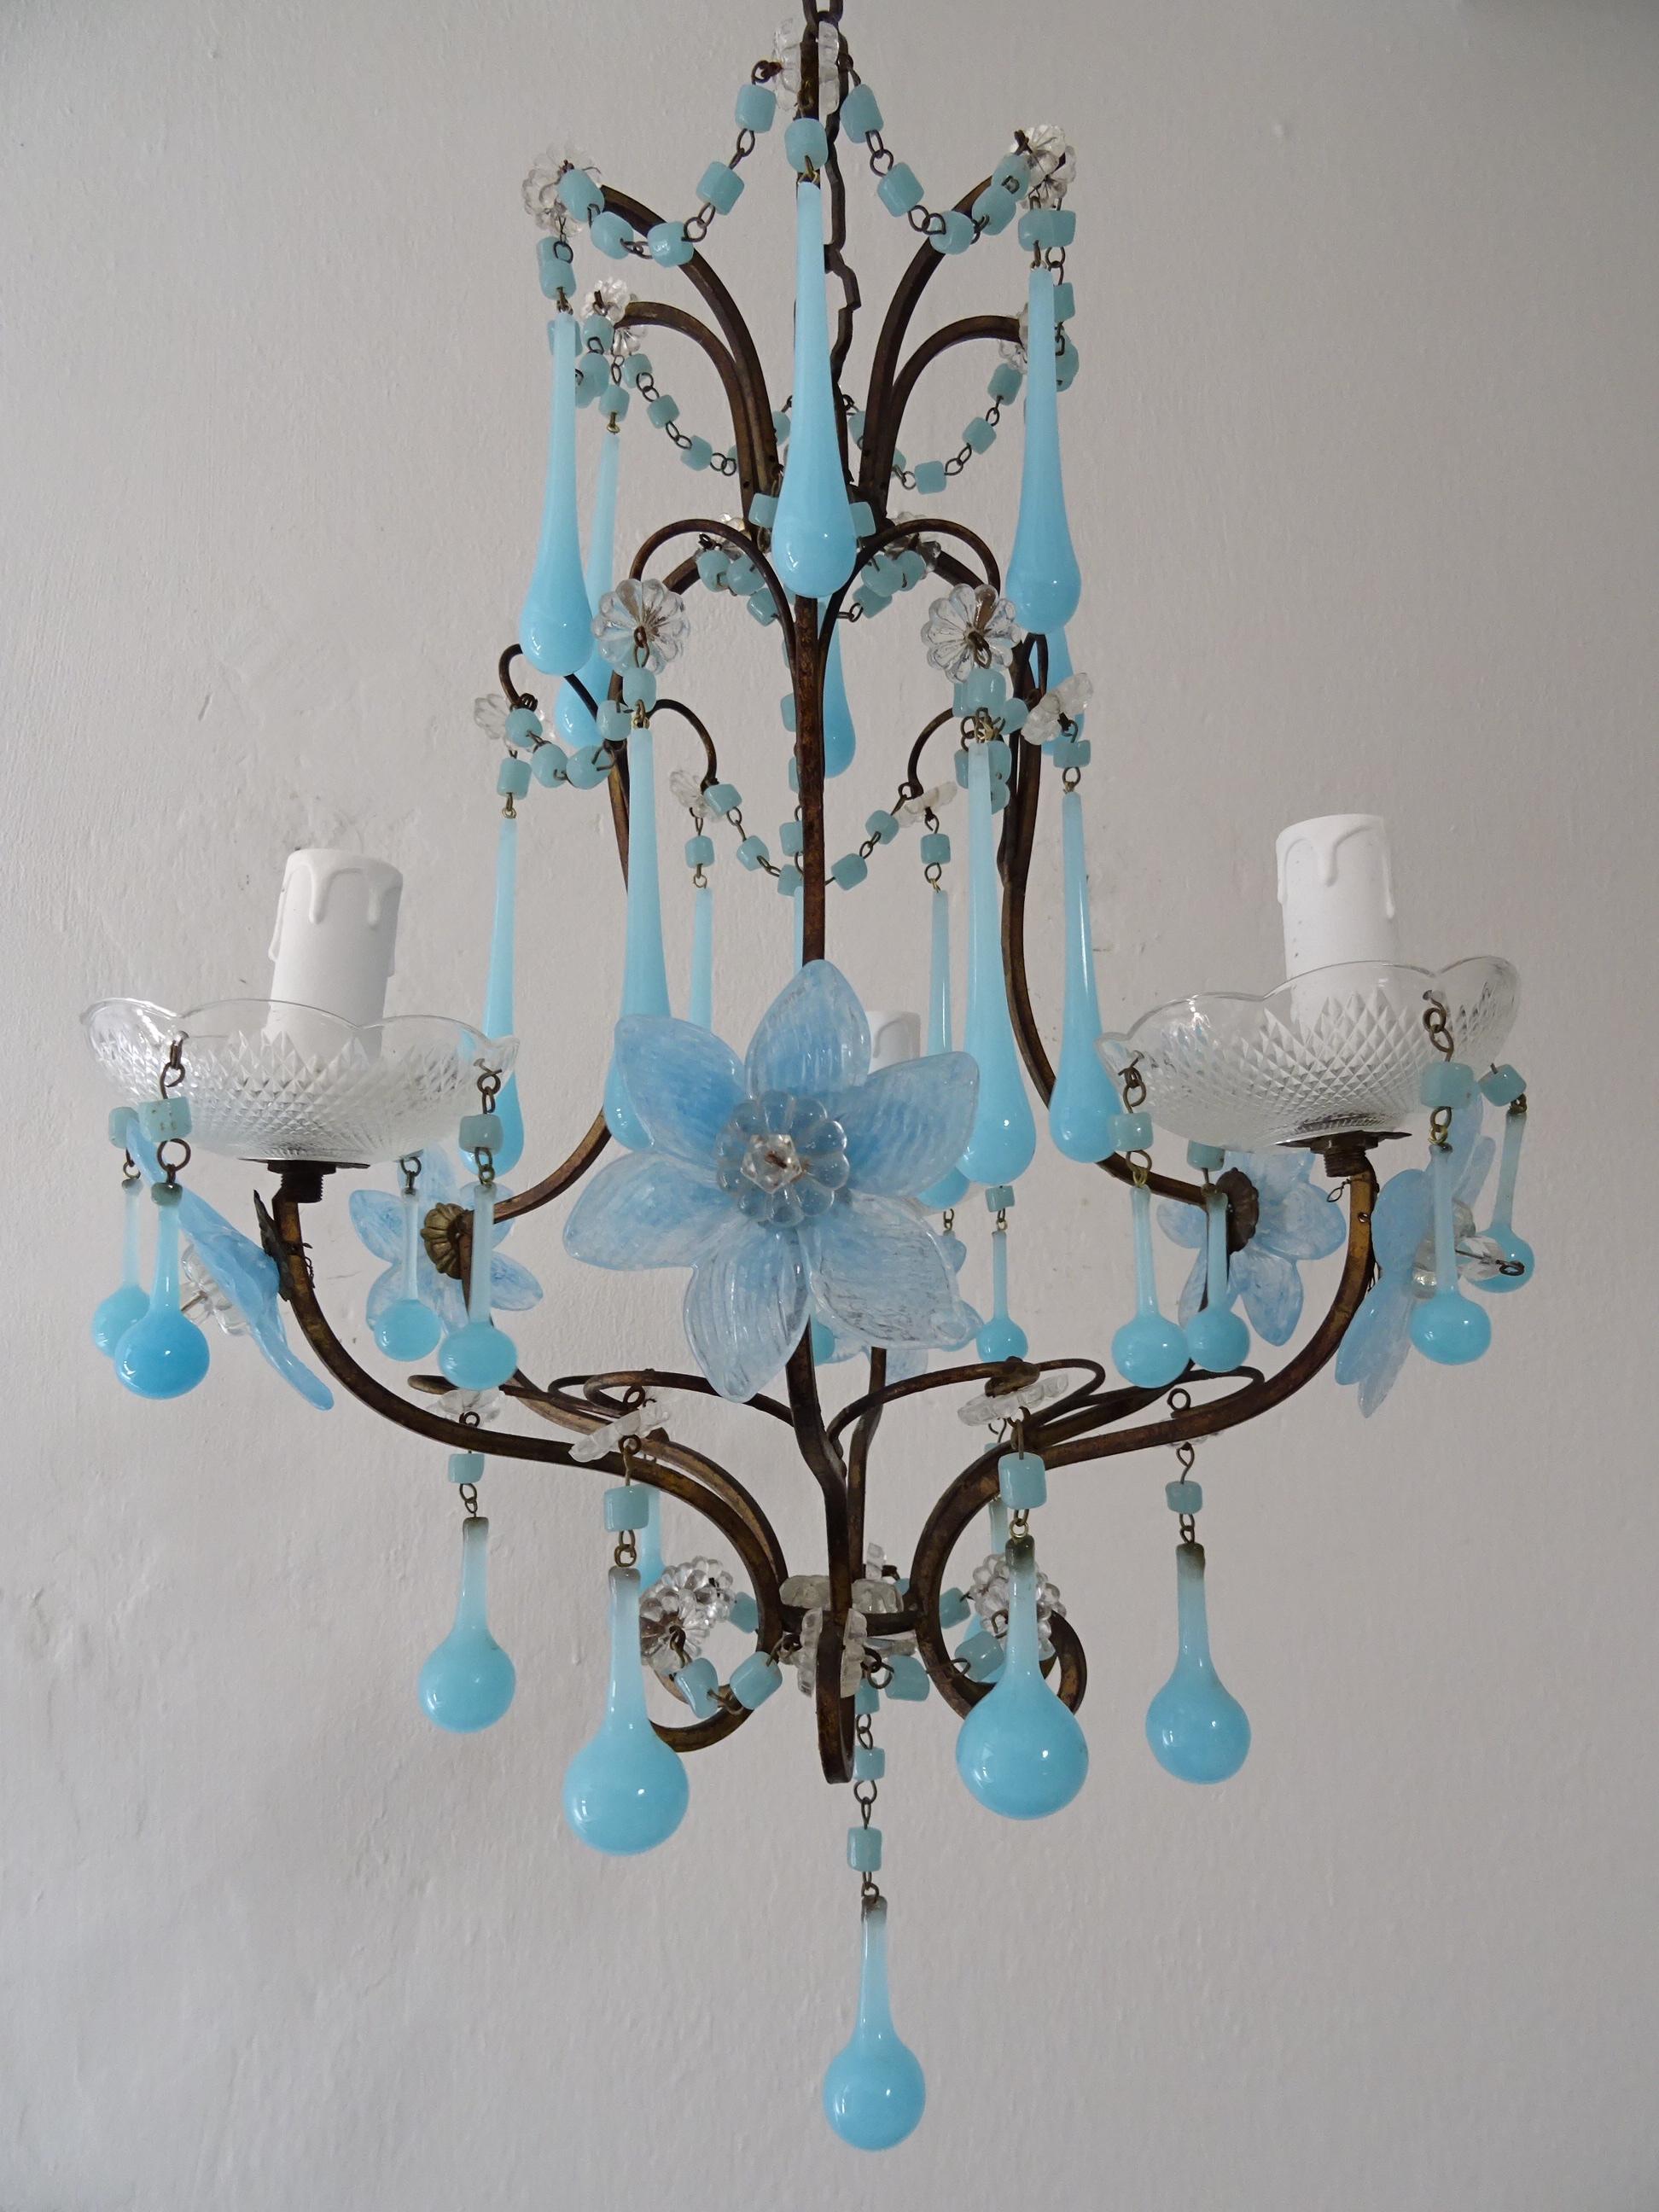 Housing 3 lights, sitting in crystal bobeches with blue Murano opaline beads and small drops. Will be wired with certified UL US sockets for the USA and appropriate sockets for all other countries and ready to hang. Swags of macaroni beads in